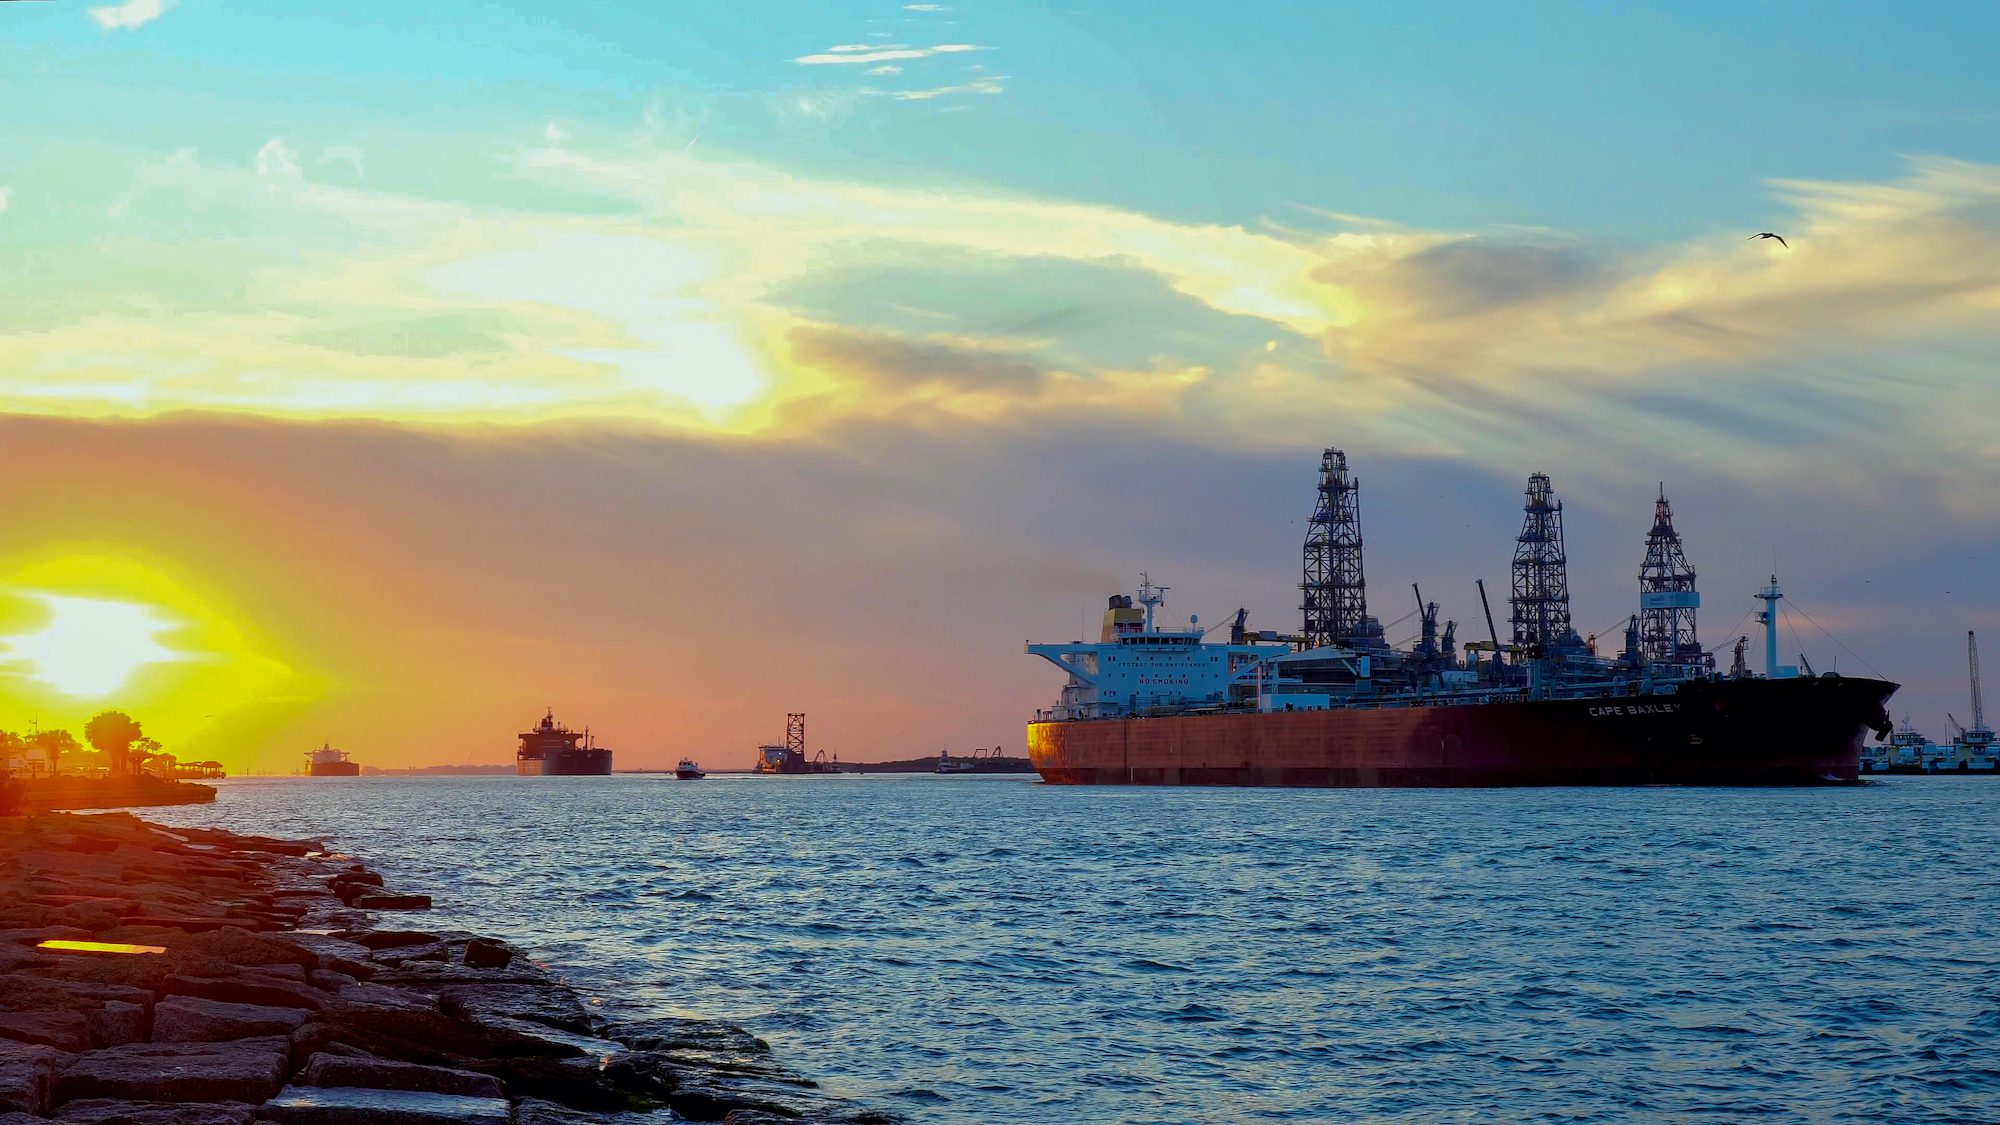 Oil tankers transiting the Corpus Christi ship channel to the Gulf of Mexico during sunset